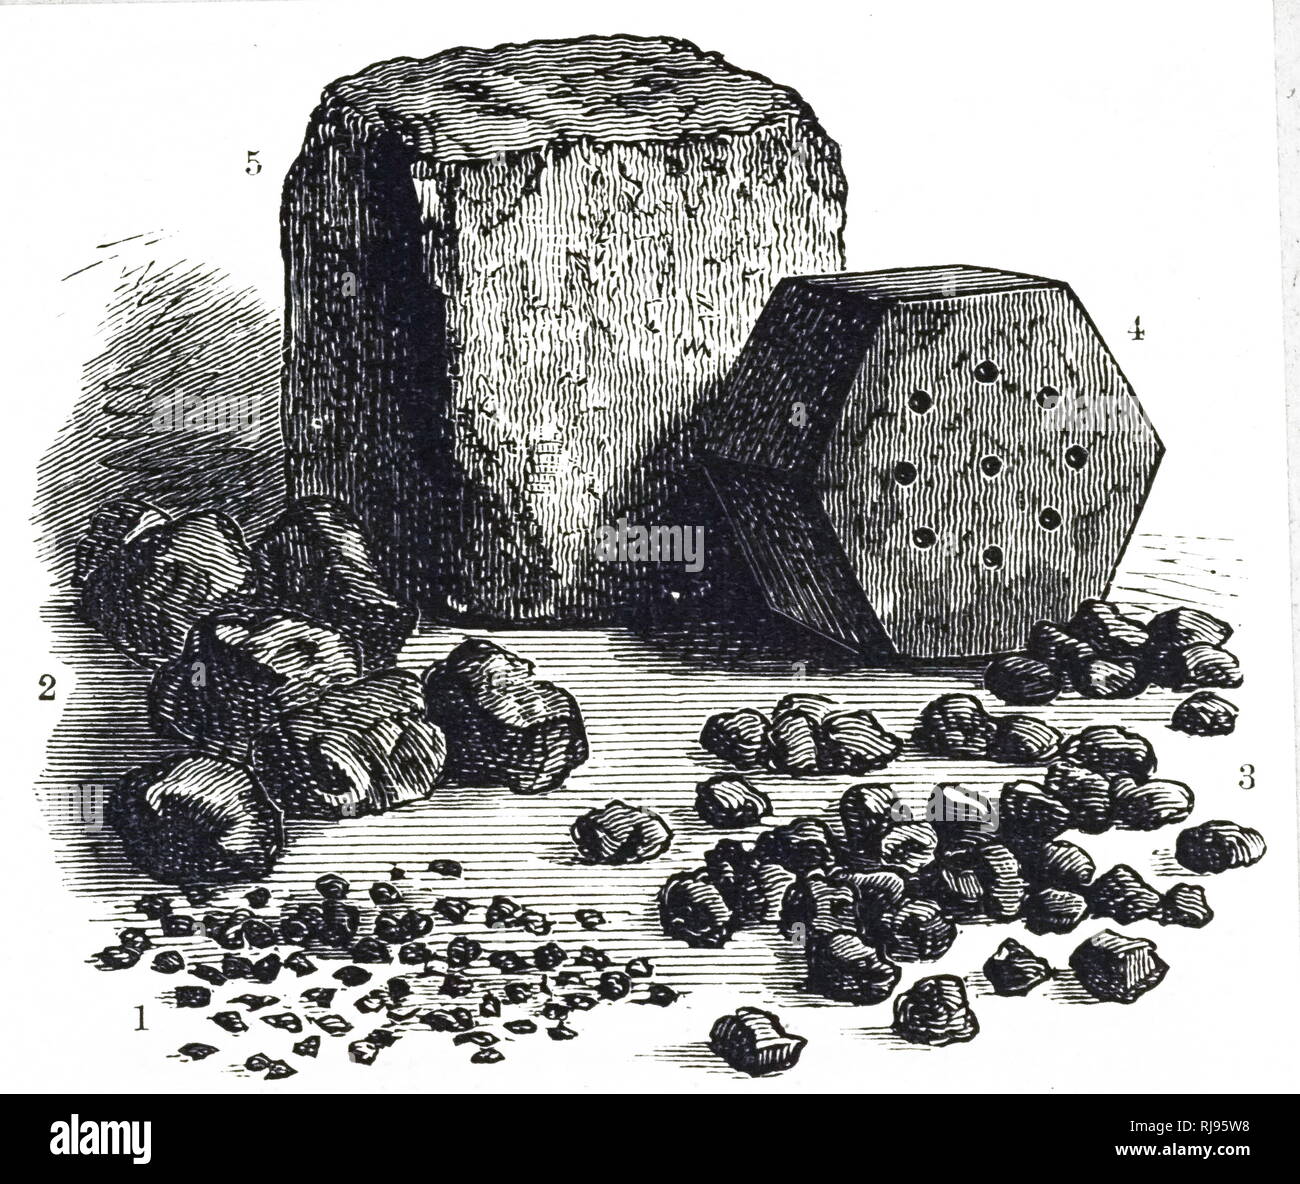 An engraving depicting various sizes and pieces of gunpowder, in use towards the end of the nineteenth century, ranging from the fine Poudre-brutale (1) through pebble (2) mammoth (3) prismatic (4) to cube (5) which could weigh half a pound and have 2 inch sides to each cube. Dated 19th century Stock Photo